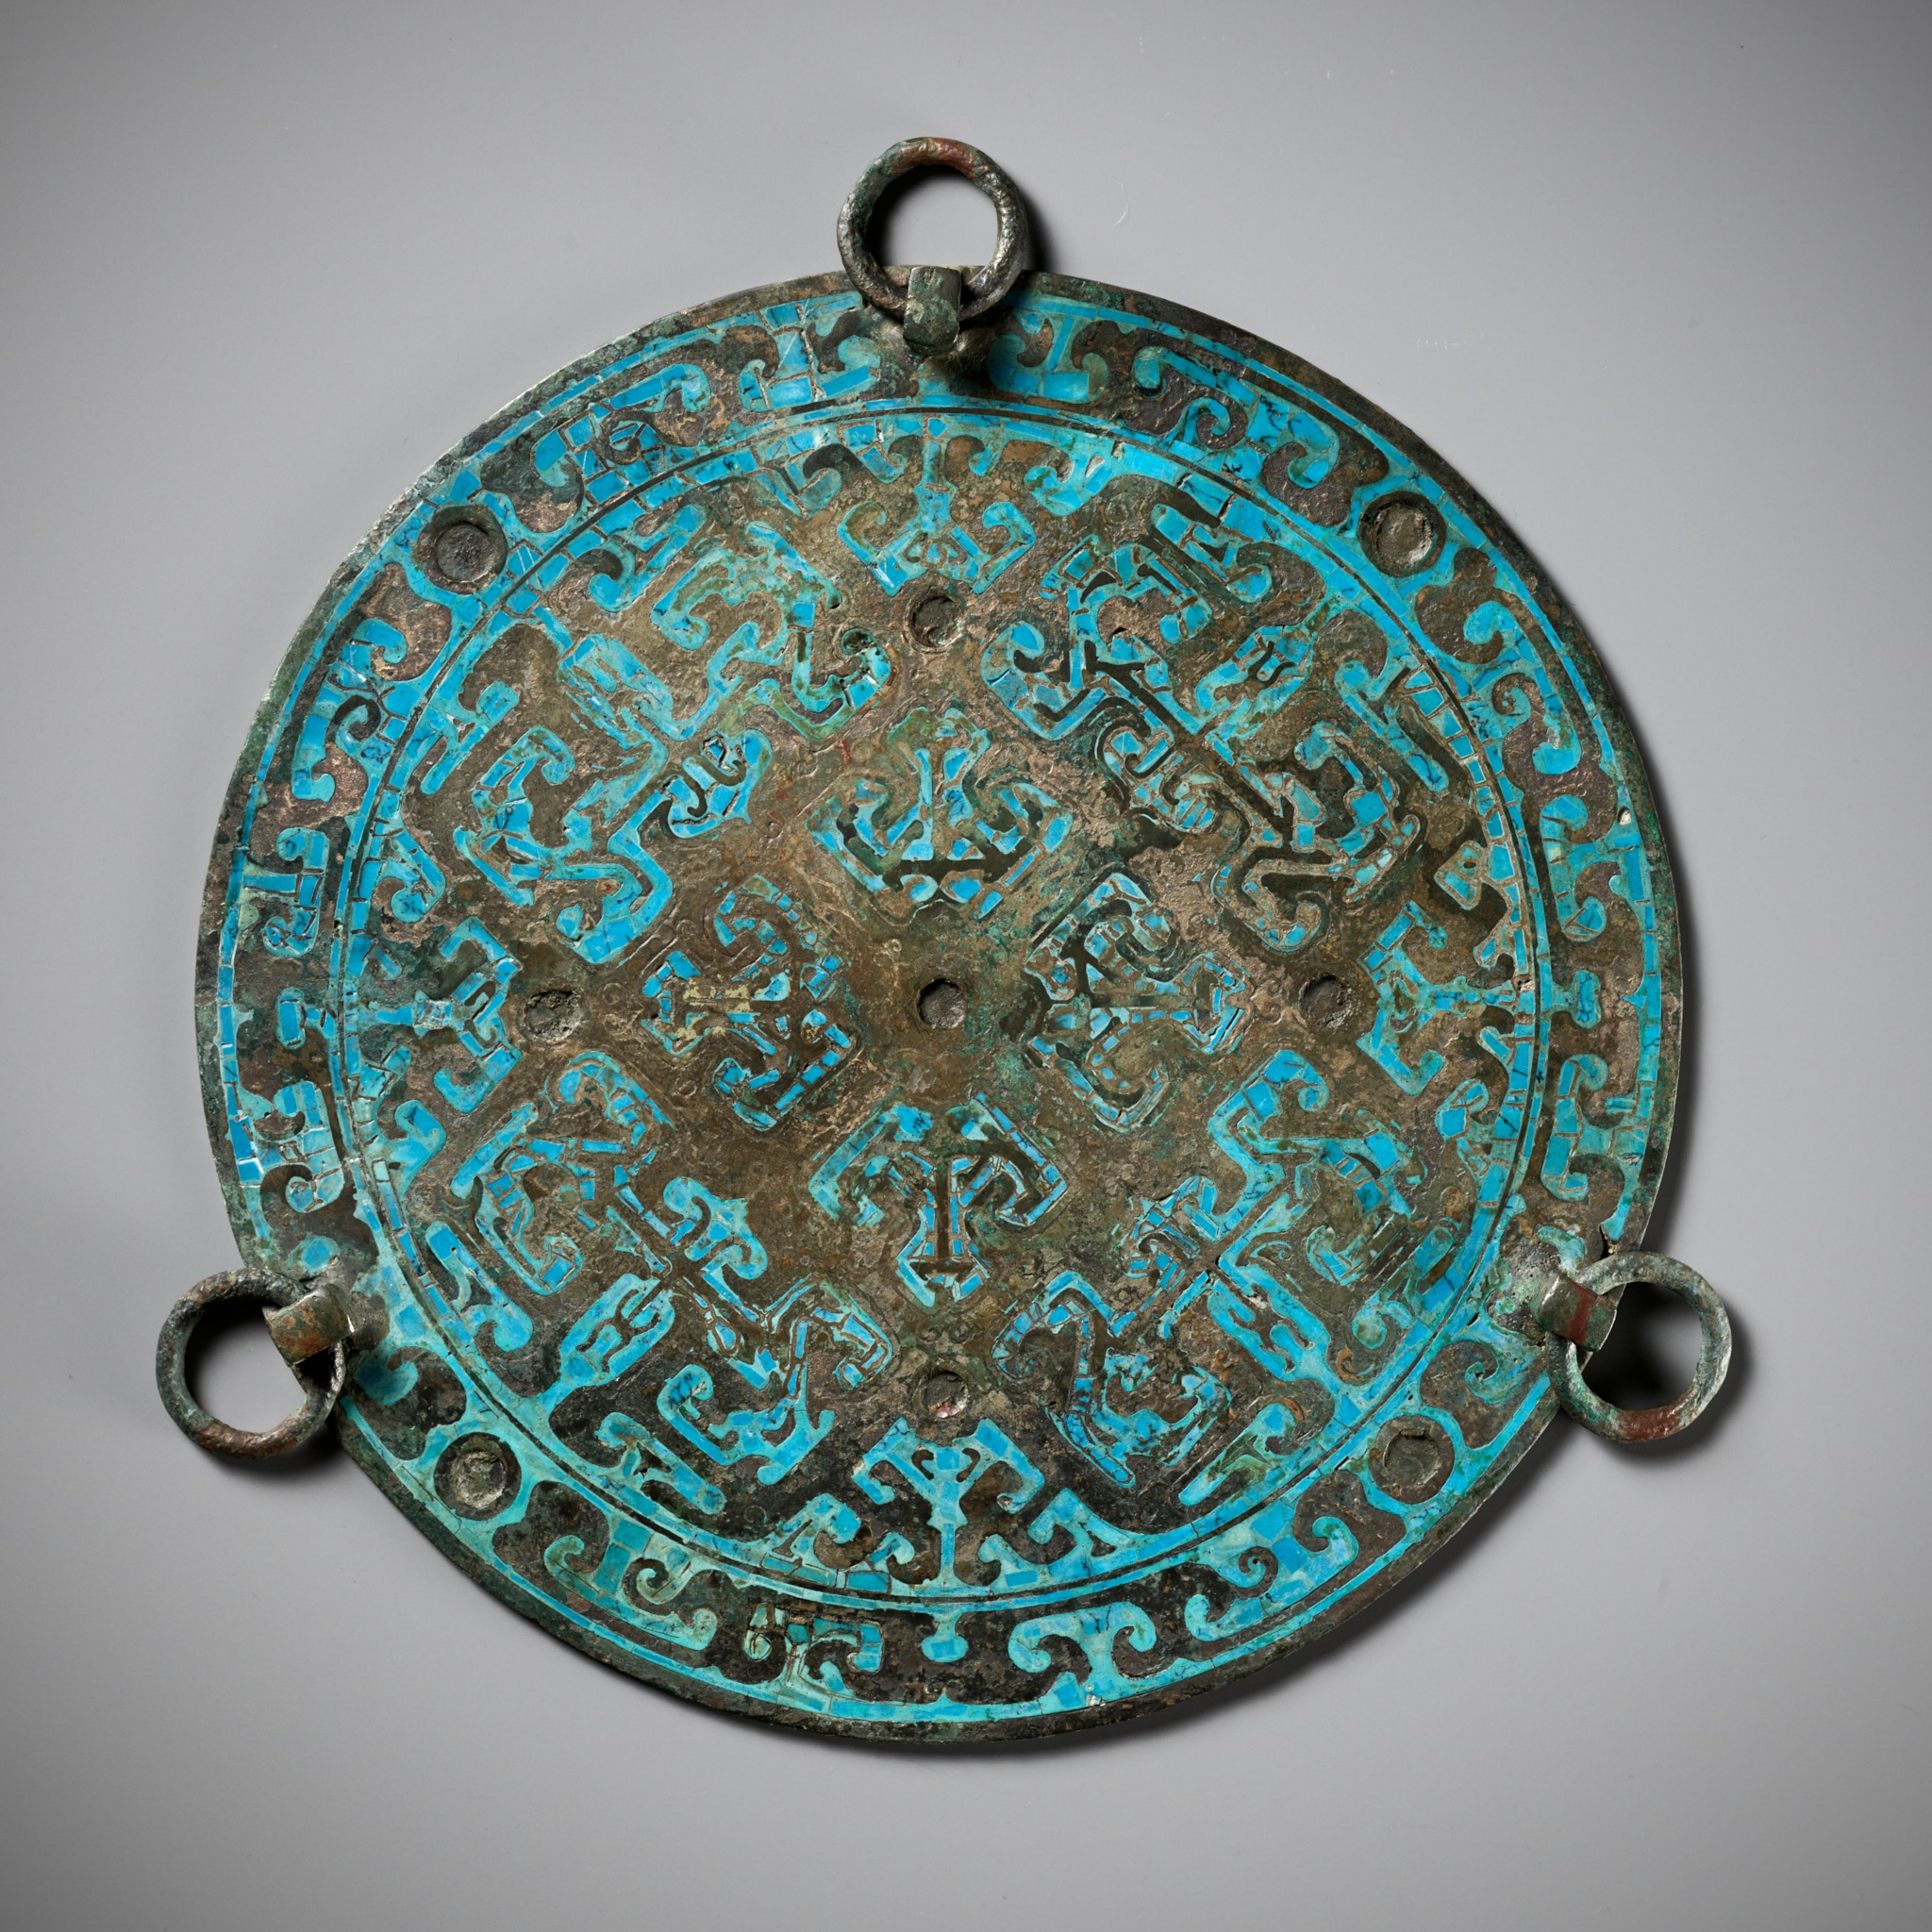 A RARE TURQUOISE-INLAID BRONZE MIRROR, WARRING STATES PERIOD